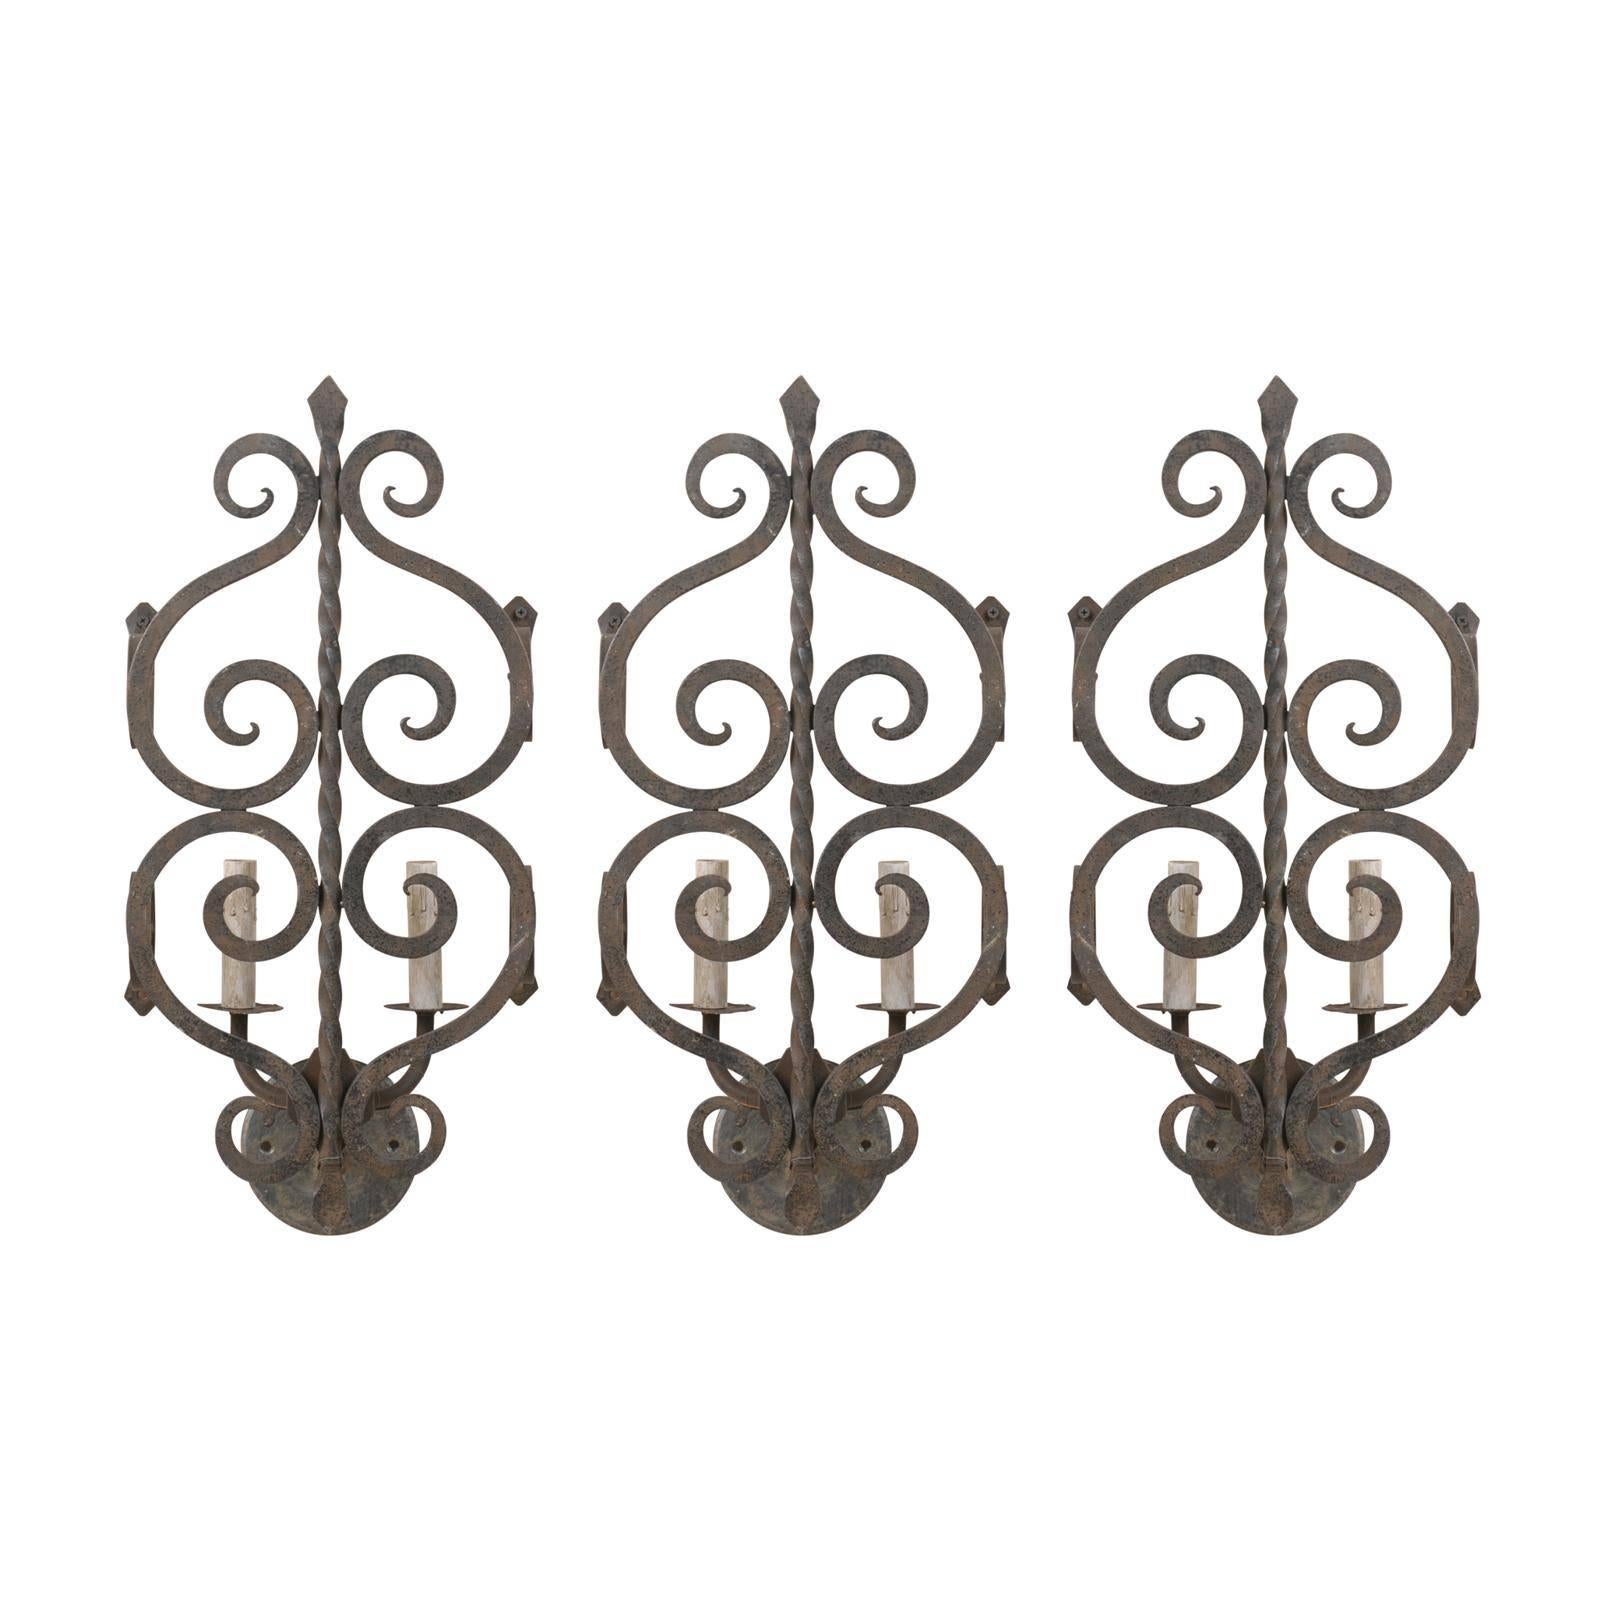 A Set of Three French Two-Light Forged Iron Sconces Featuring Scroll Decor